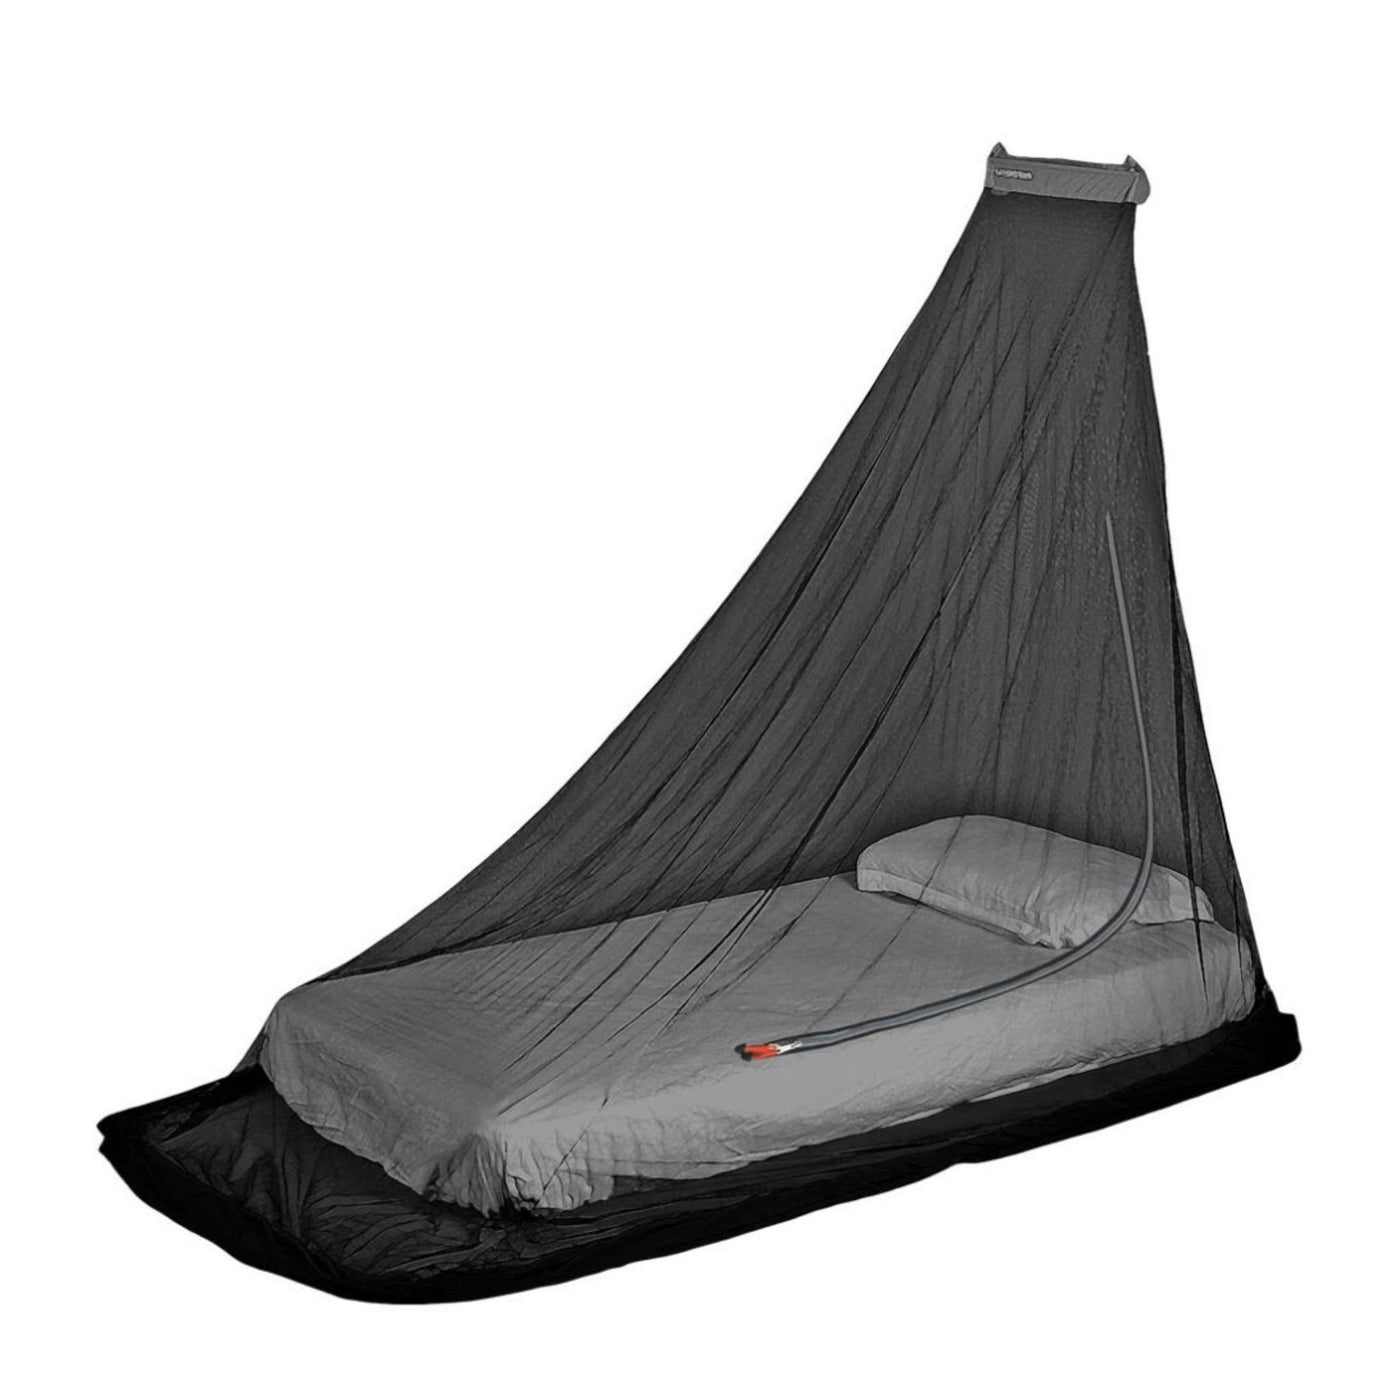 Lifesystems SoloNet Single Mosquito Net | Mosquito Nets NZ | Further Faster Christchurch NZ